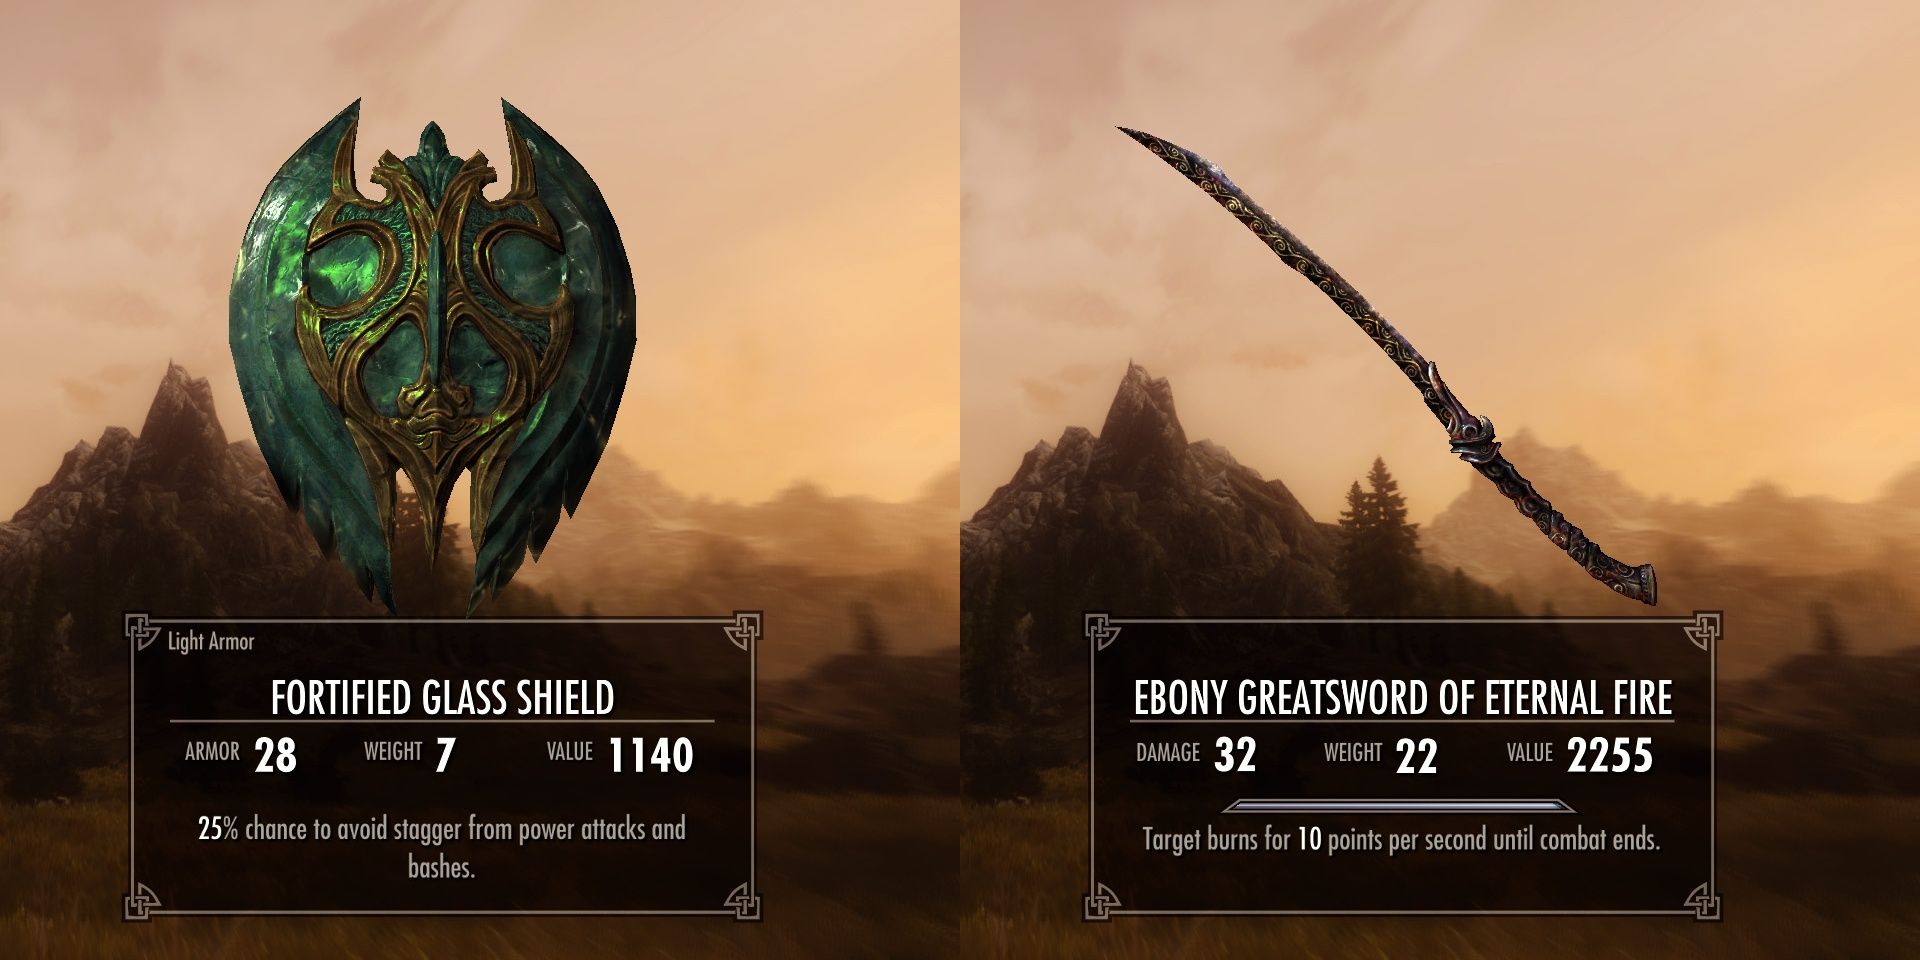 Summermyst Mod For Skyrim Featuring New Weapon & Armor Enchantments